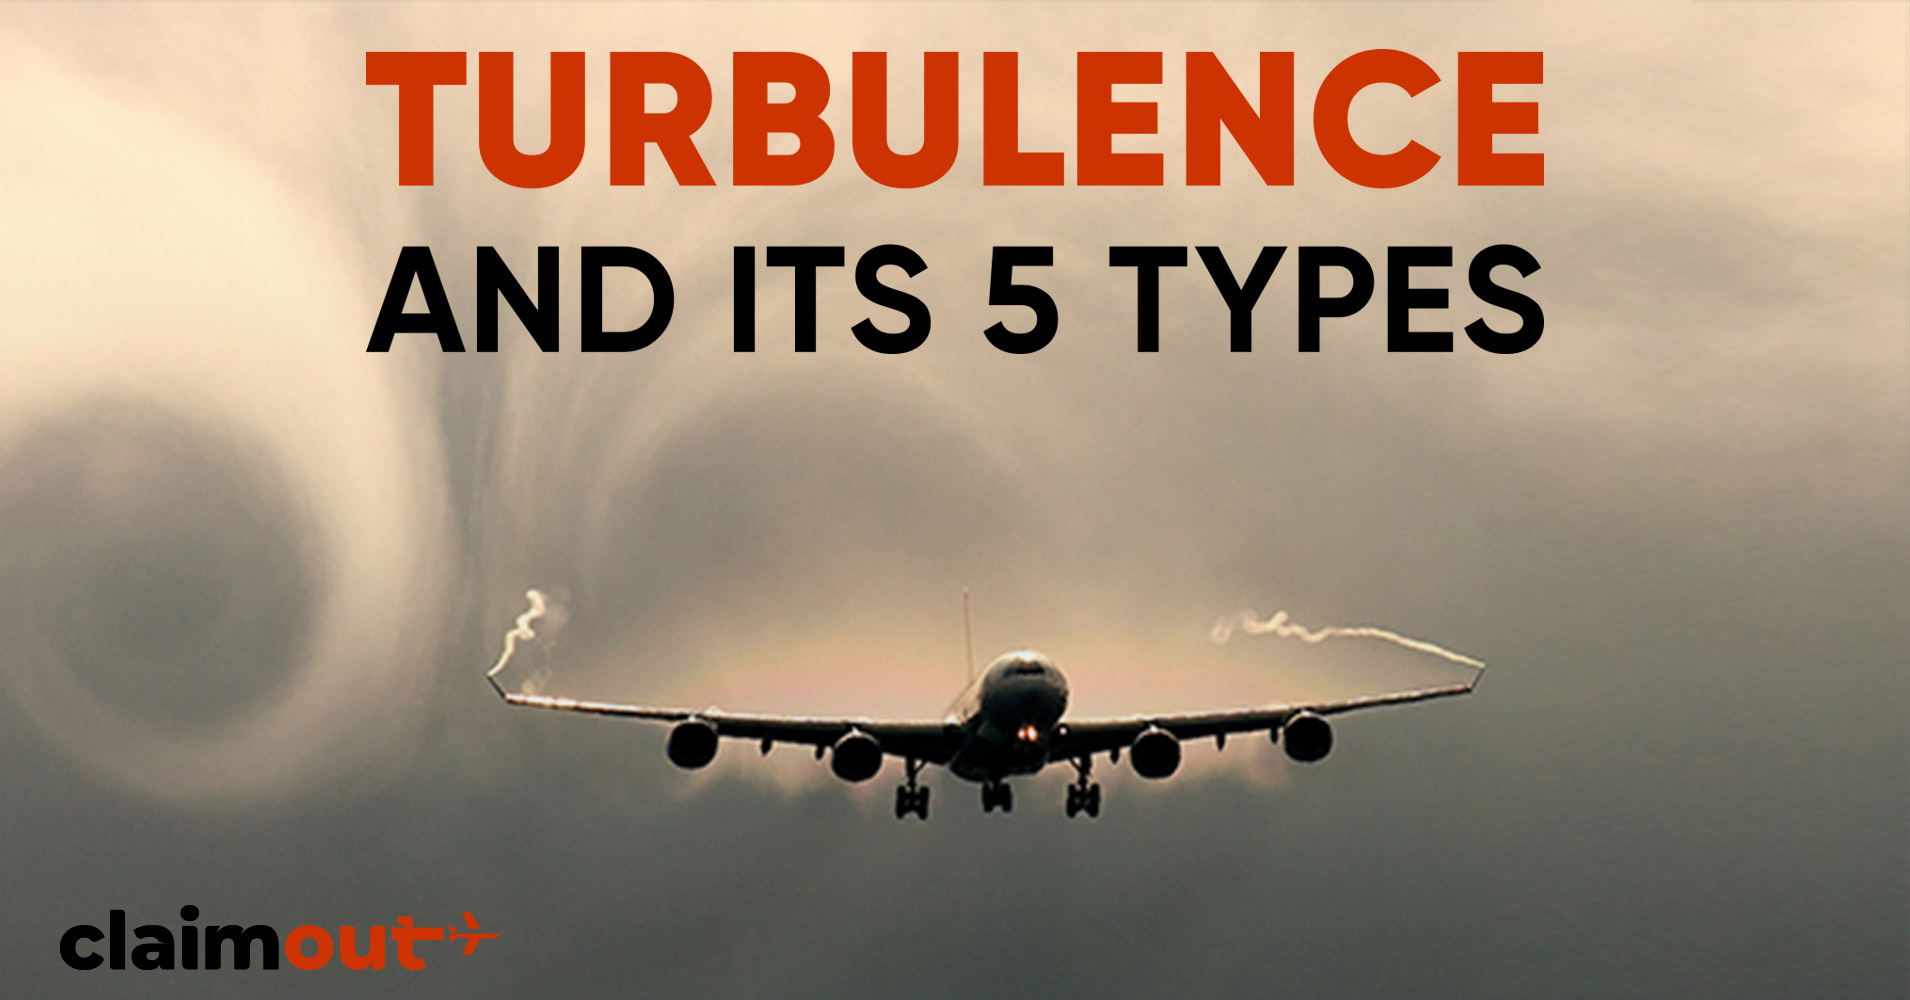 Turbulence? Our Fears are in the Sky!